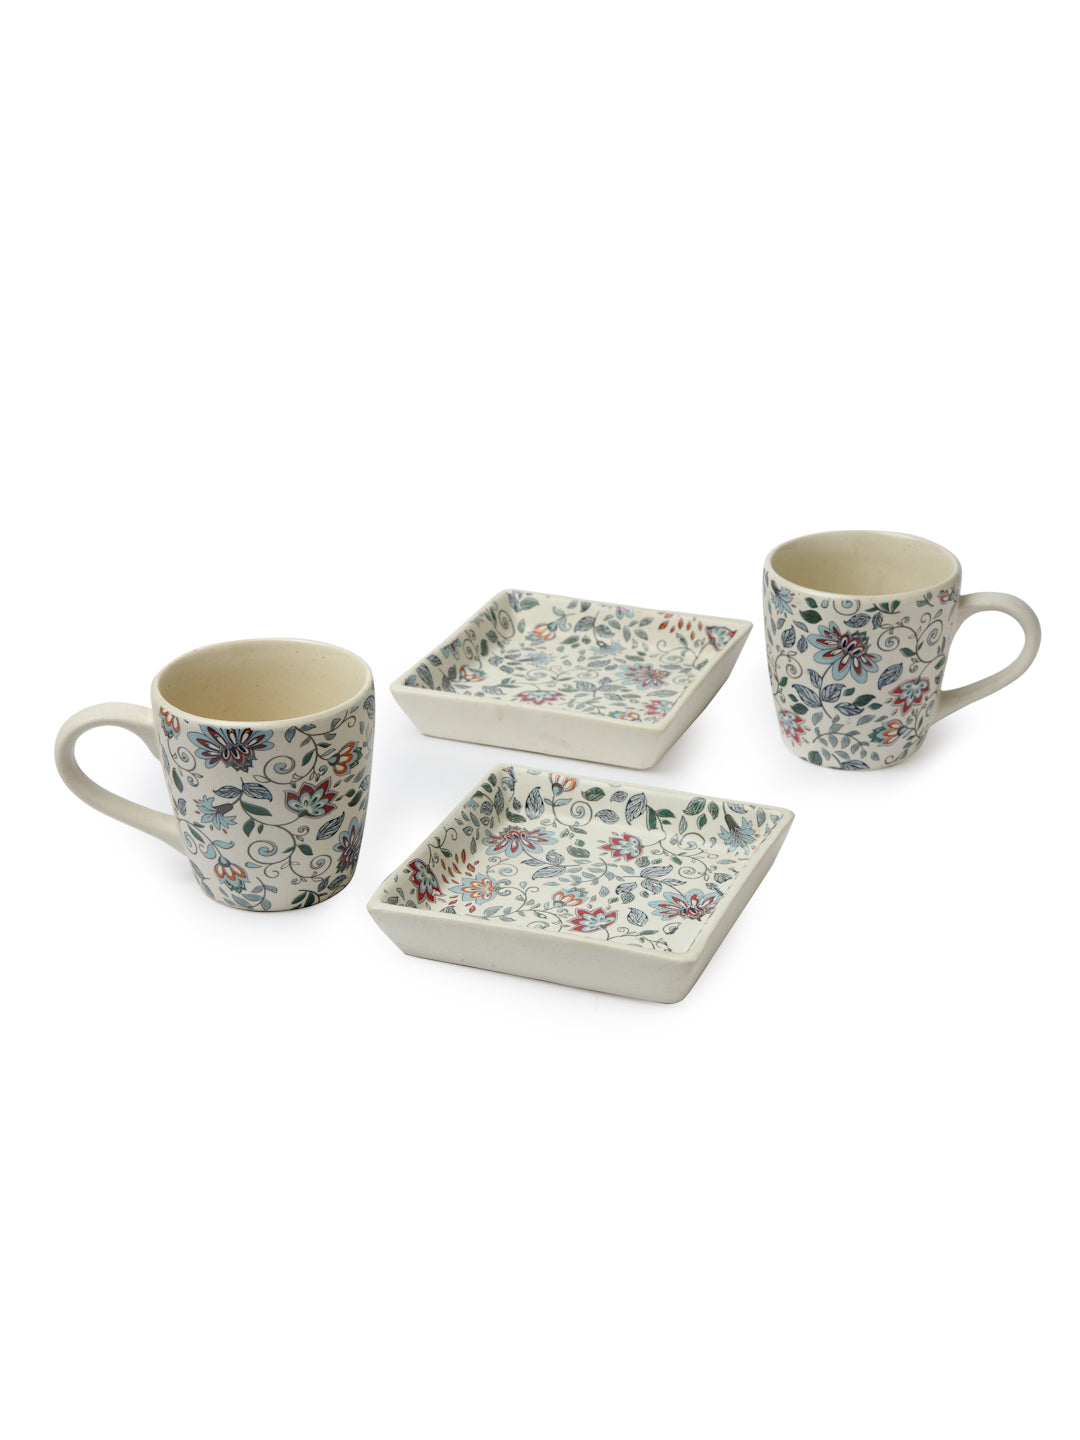 Handcrafted Printed Stoneware Matte Floral Tea set with Tray (Set of 4)